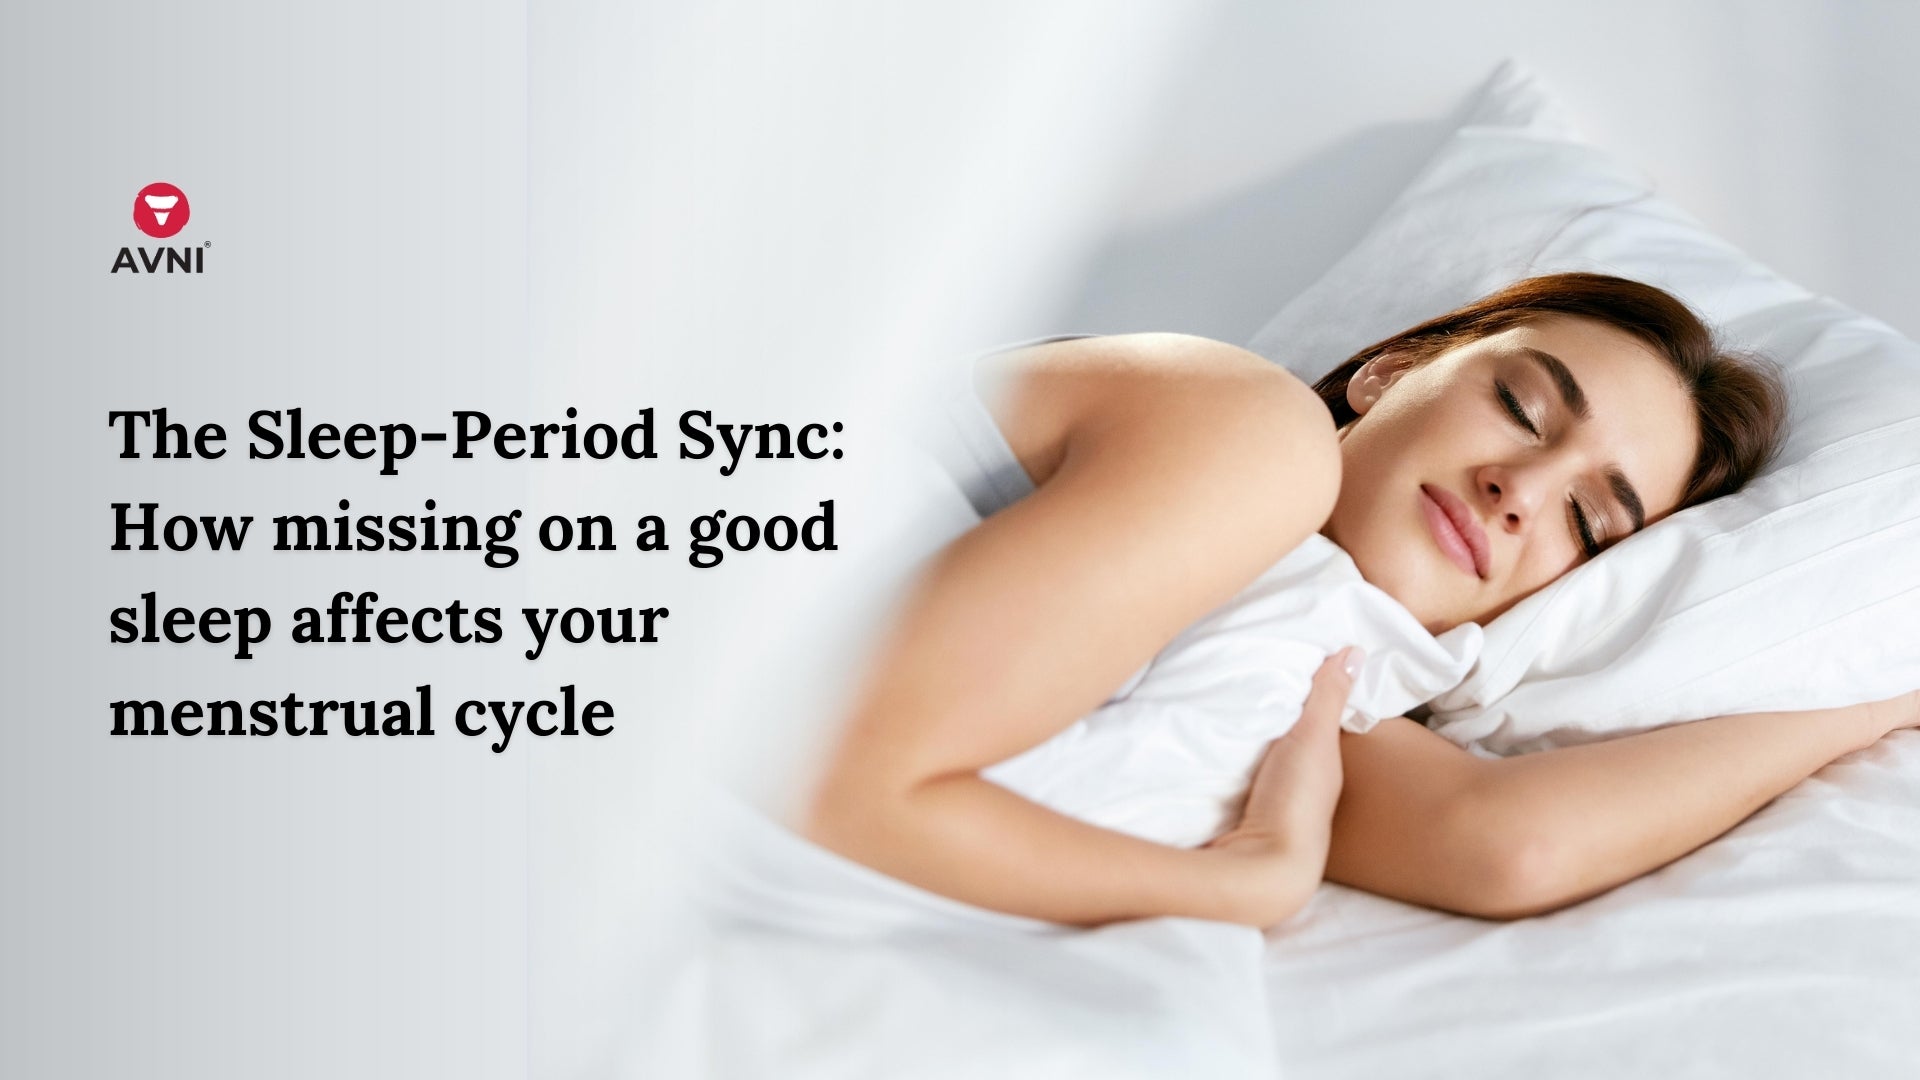 The Sleep-Period Sync: How missing on good a sleep affects your menstrual cycle